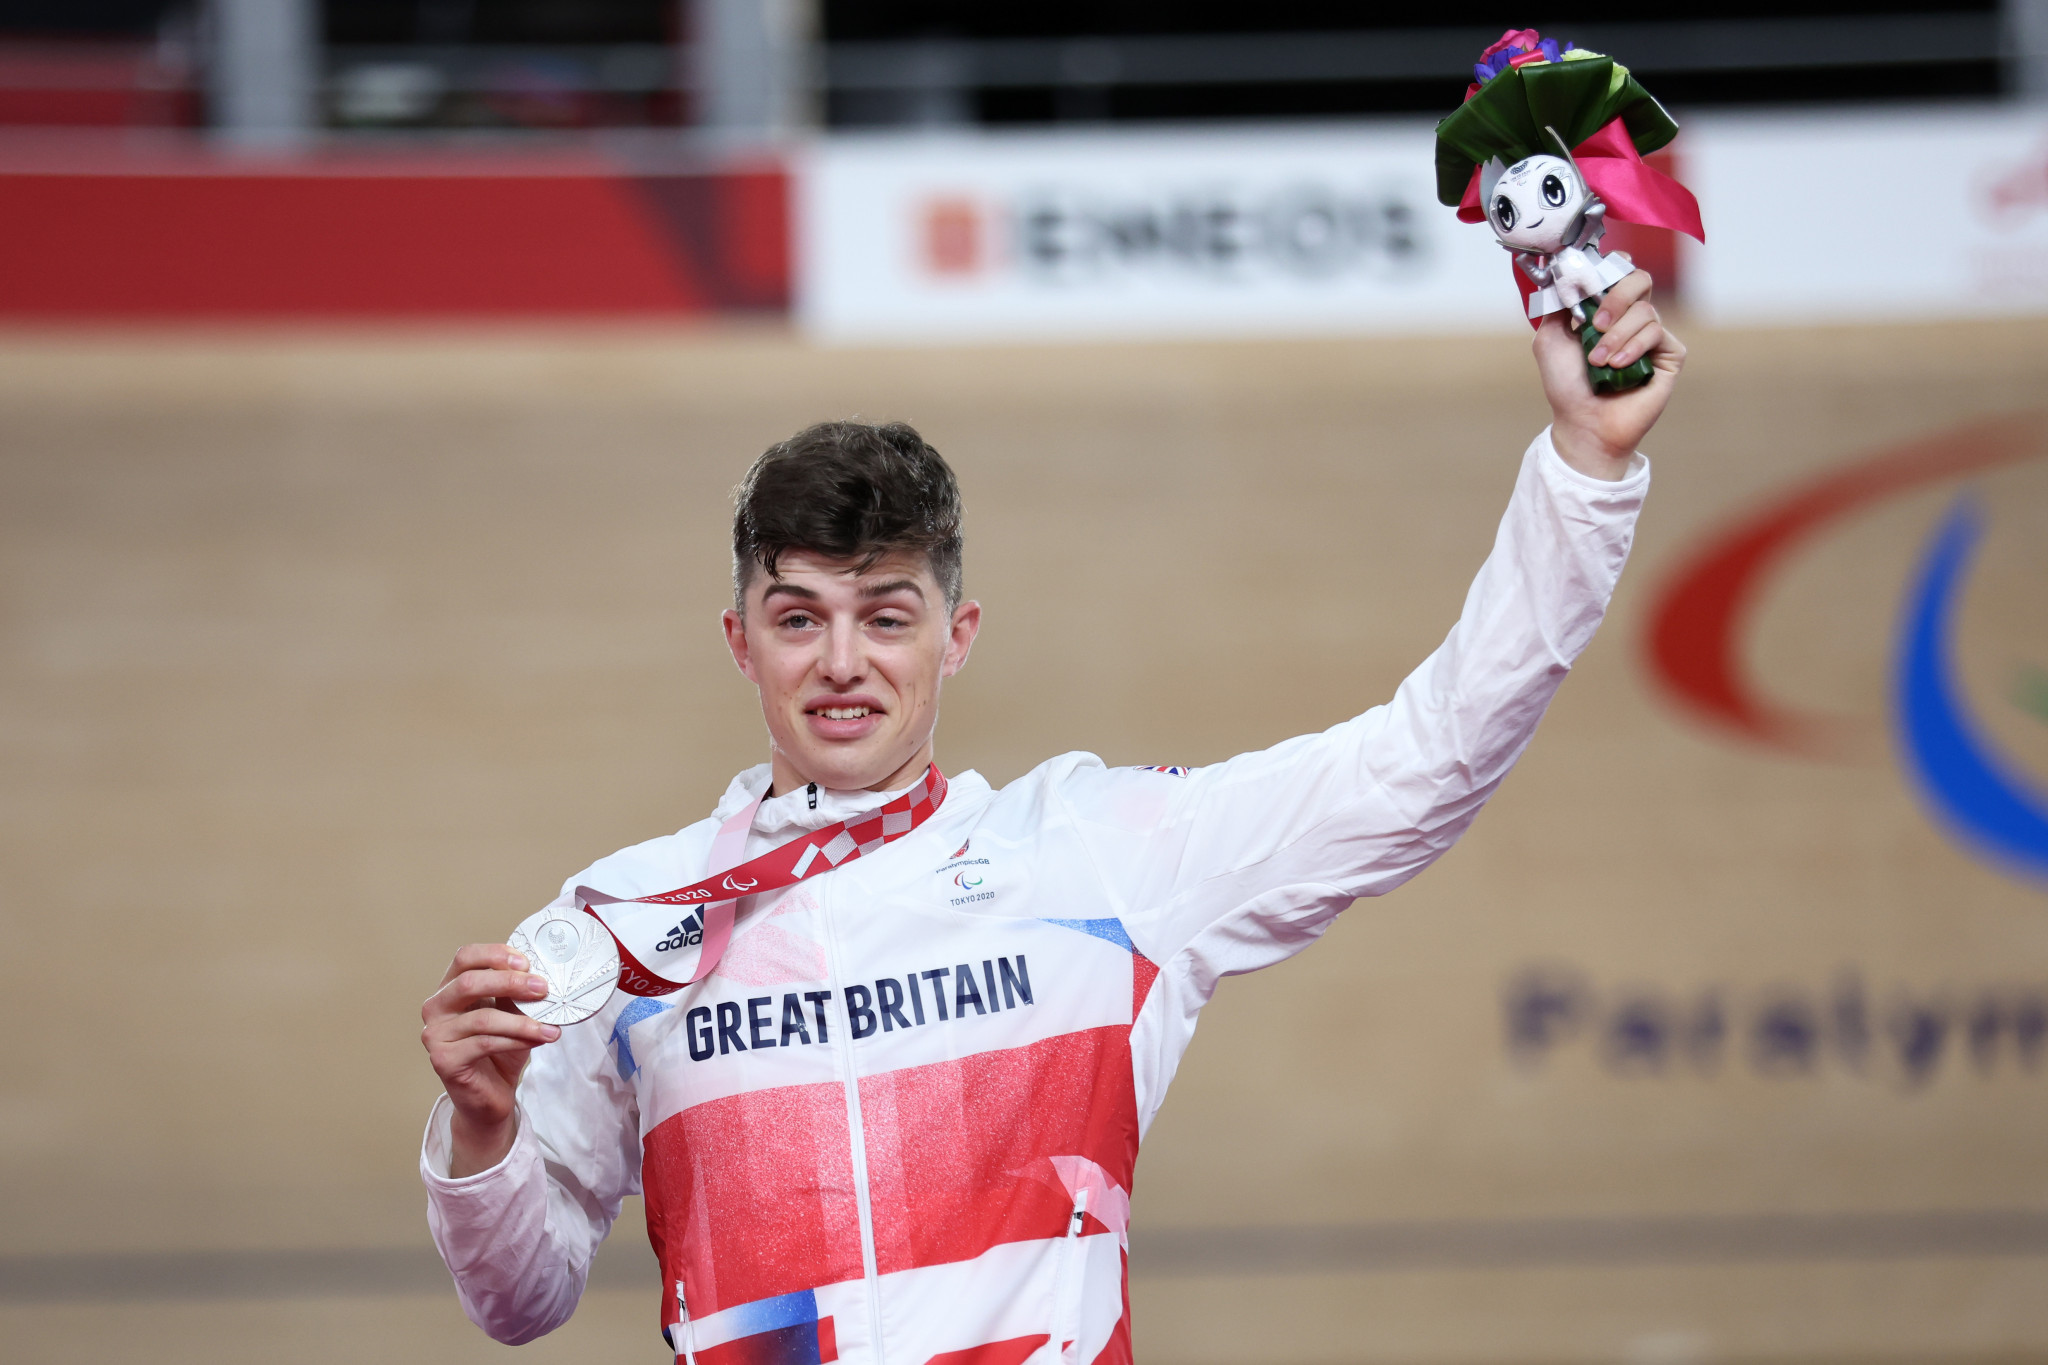 Britain's Finlay Graham was the fastest in the C3 road race and grabbed gold in 1:49.31 ©Getty Images